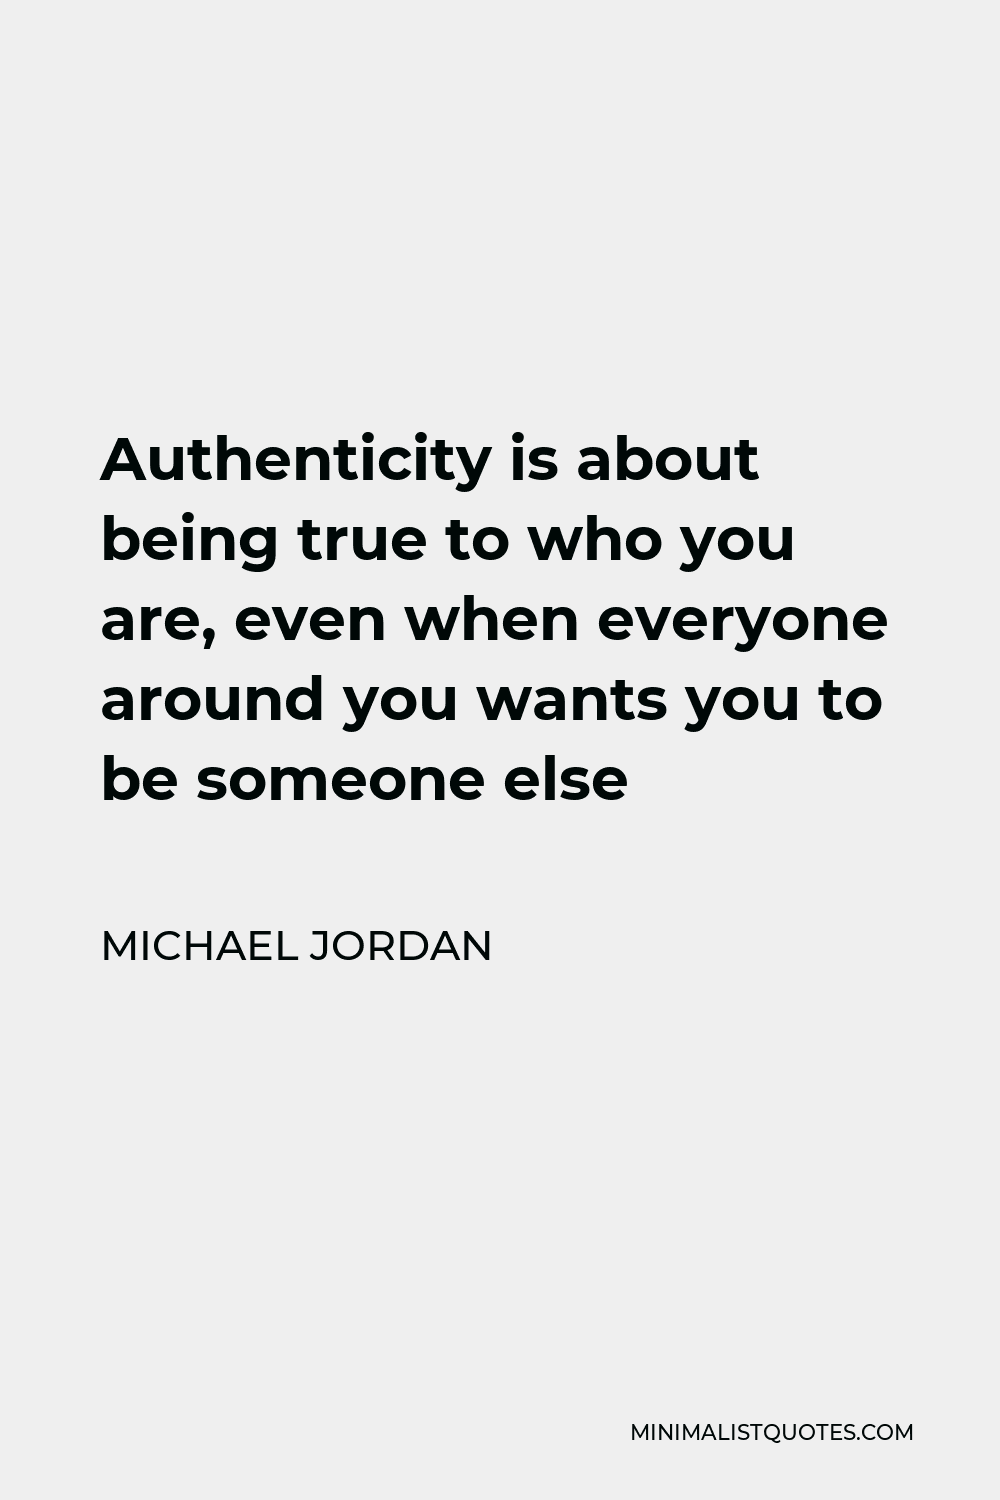 Michael Jordan Quote - Authenticity is about being true to who you are, even when everyone around you wants you to be someone else